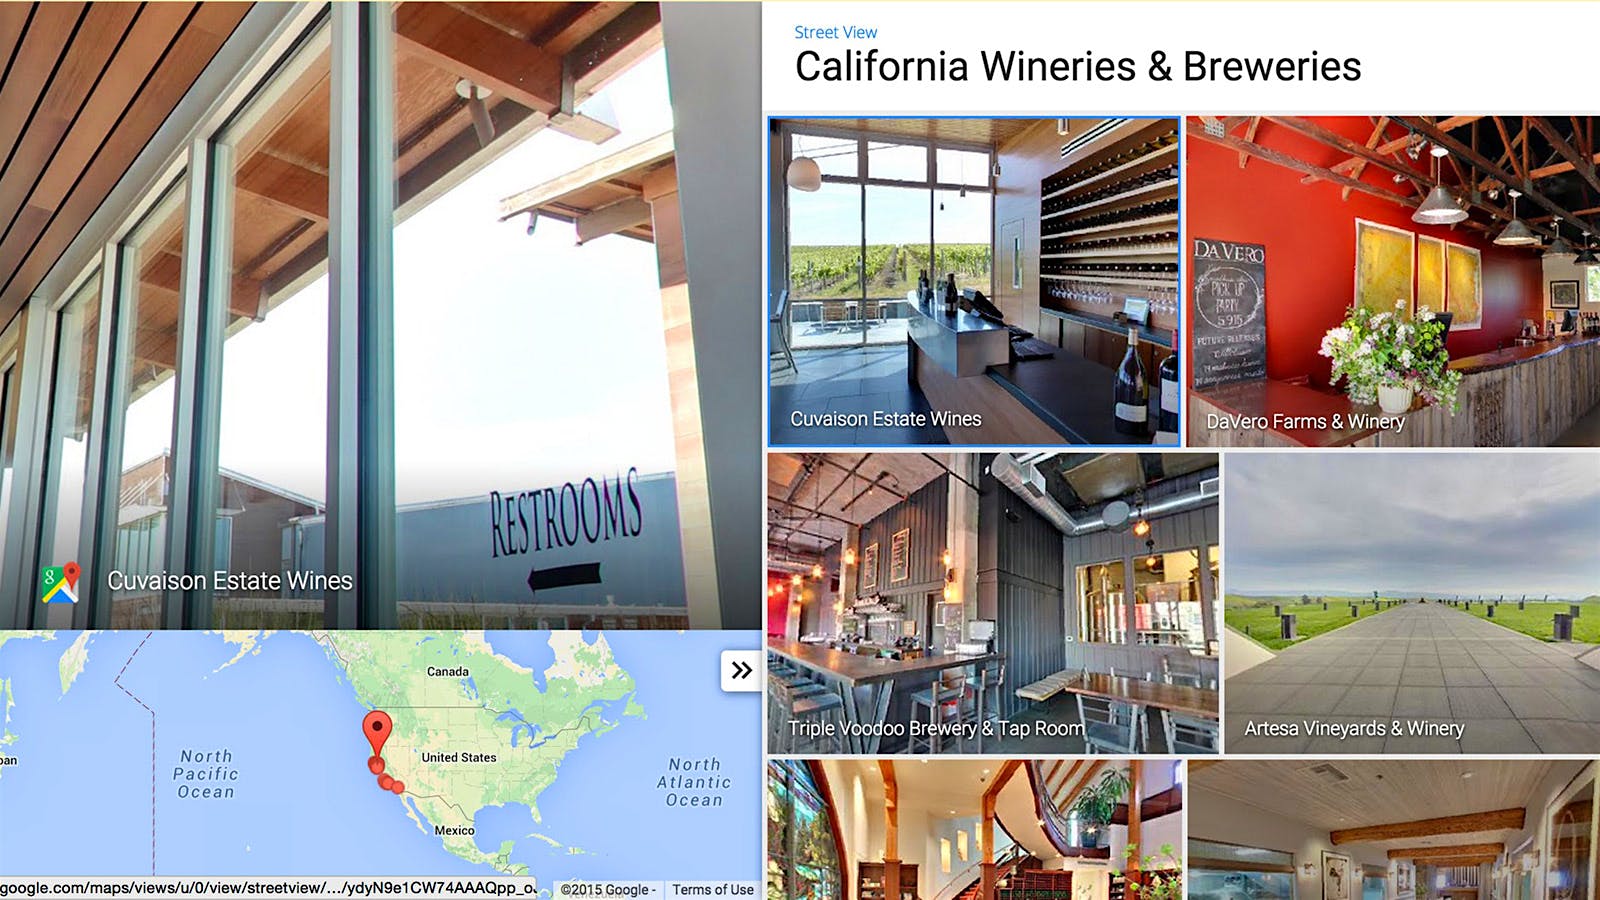 Google Street View Goes Inside California Wine Country